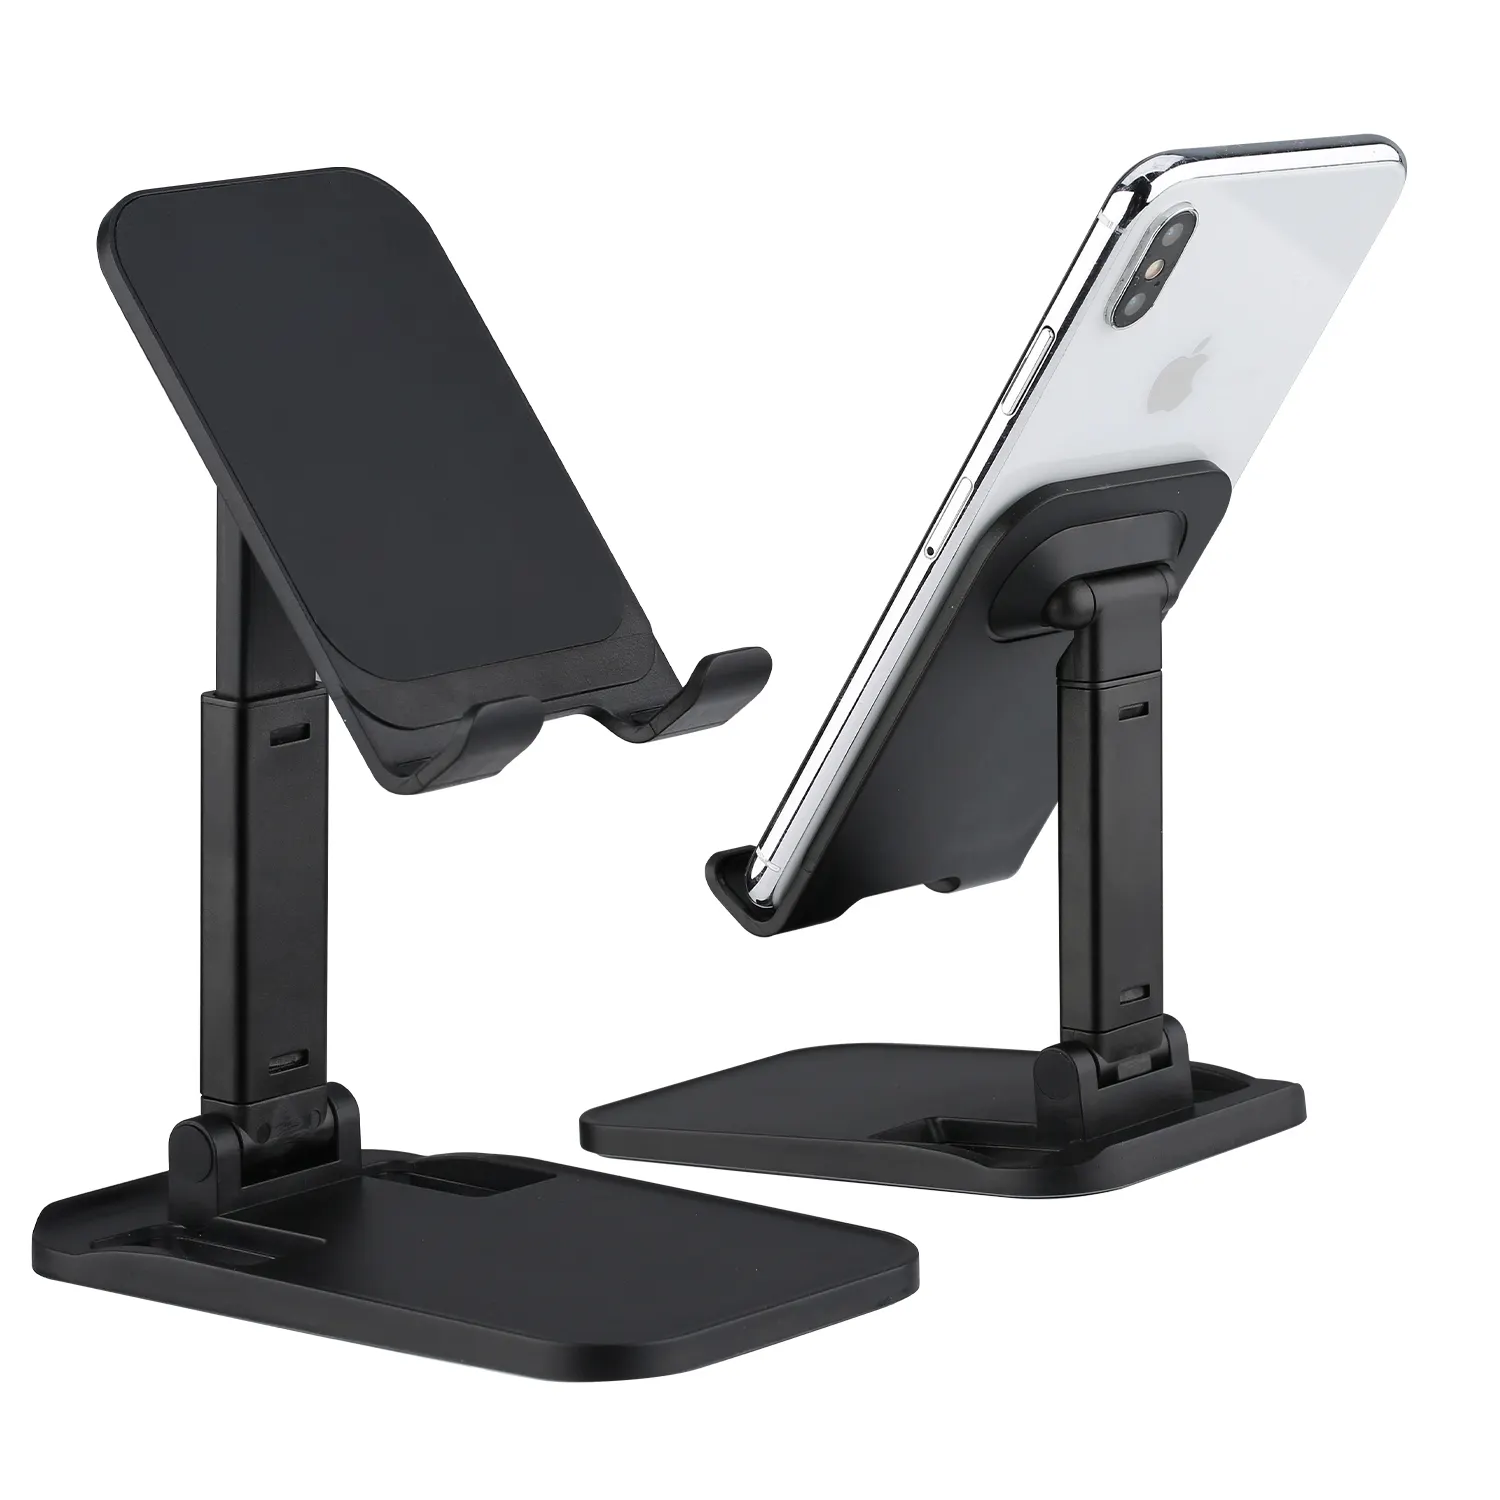 Shenzhen Multi Tool Portable Cellphone Accessories Display Flexible Table Studio Mobile Cell Phone Stand Holder For Ipad